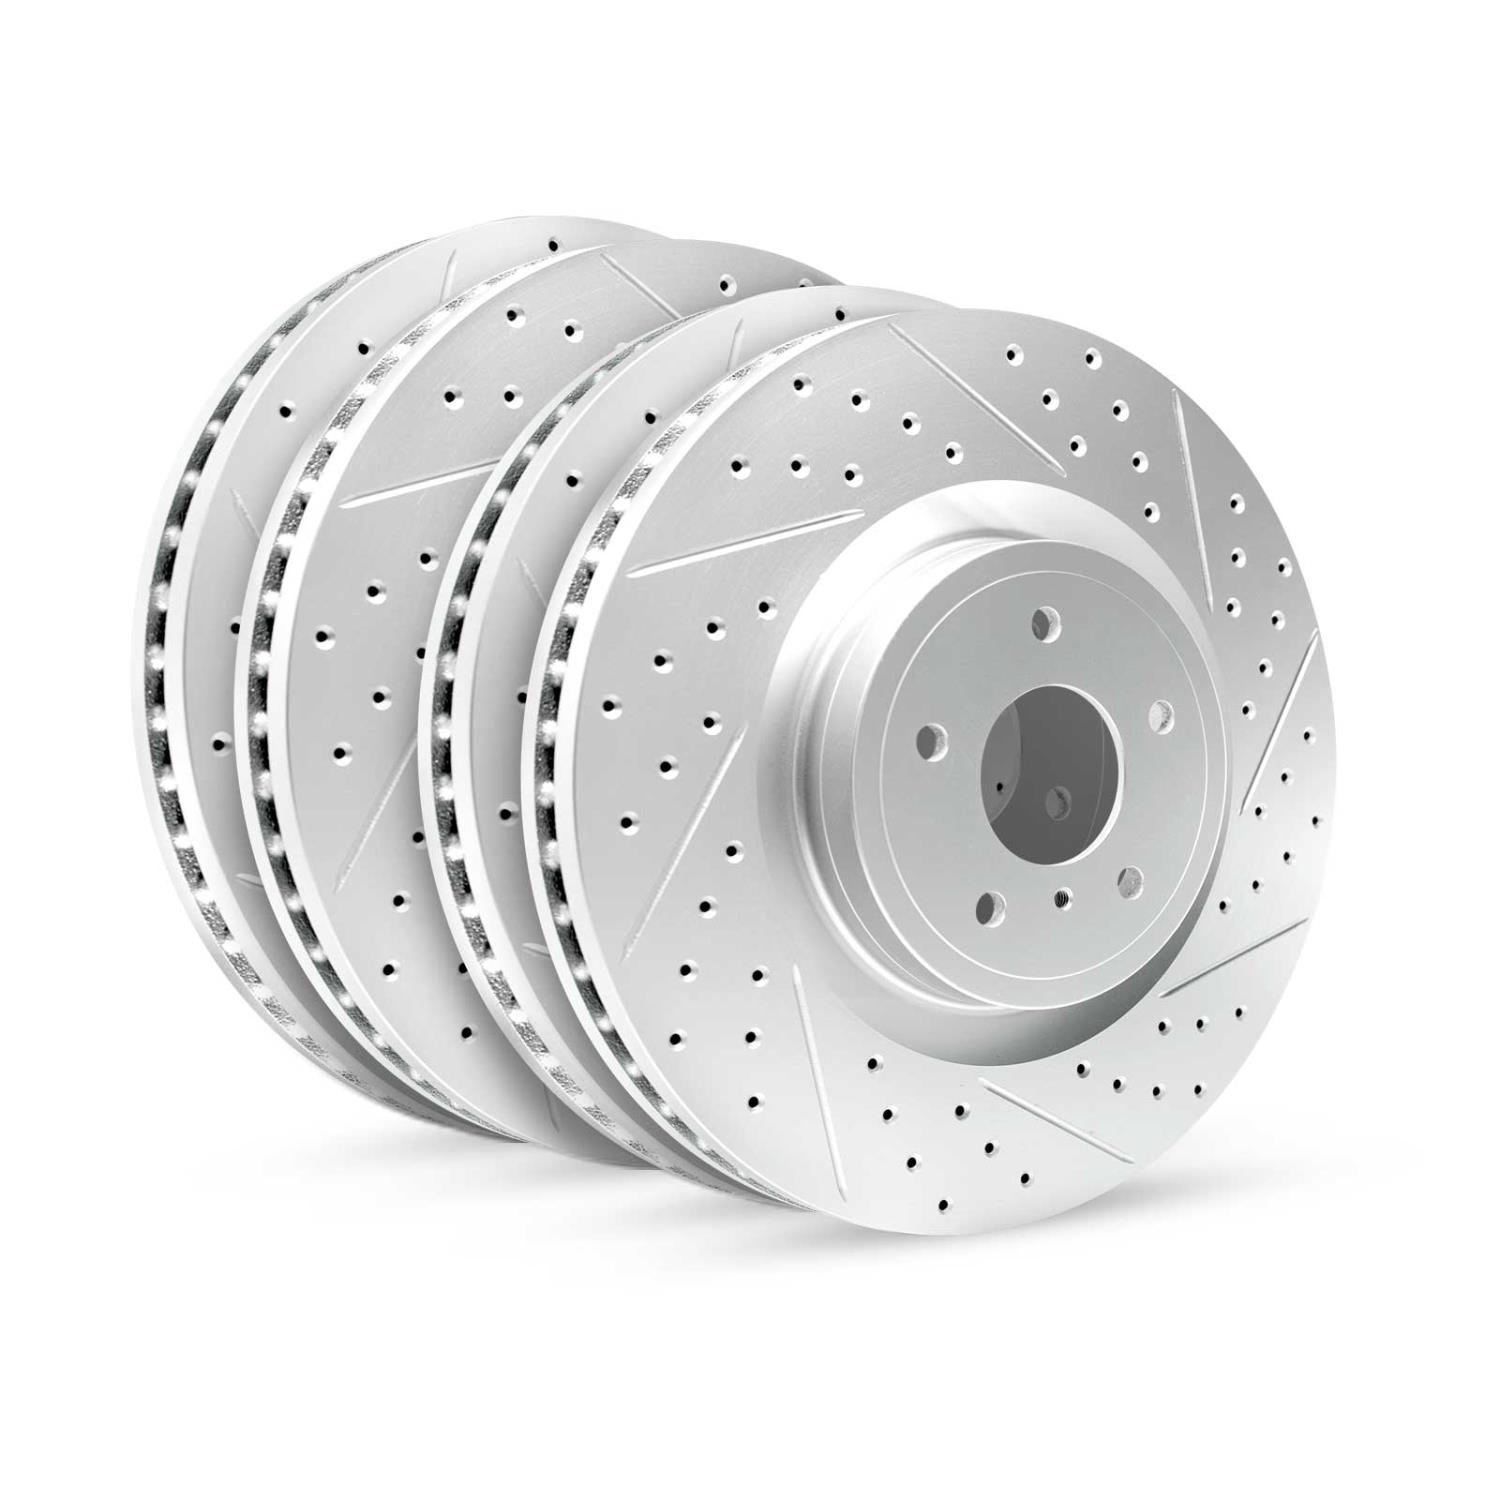 GEO-Carbon Drilled/Slotted Rotors, 2017-2019 Kia/Hyundai/Genesis, Position: Front/Rear